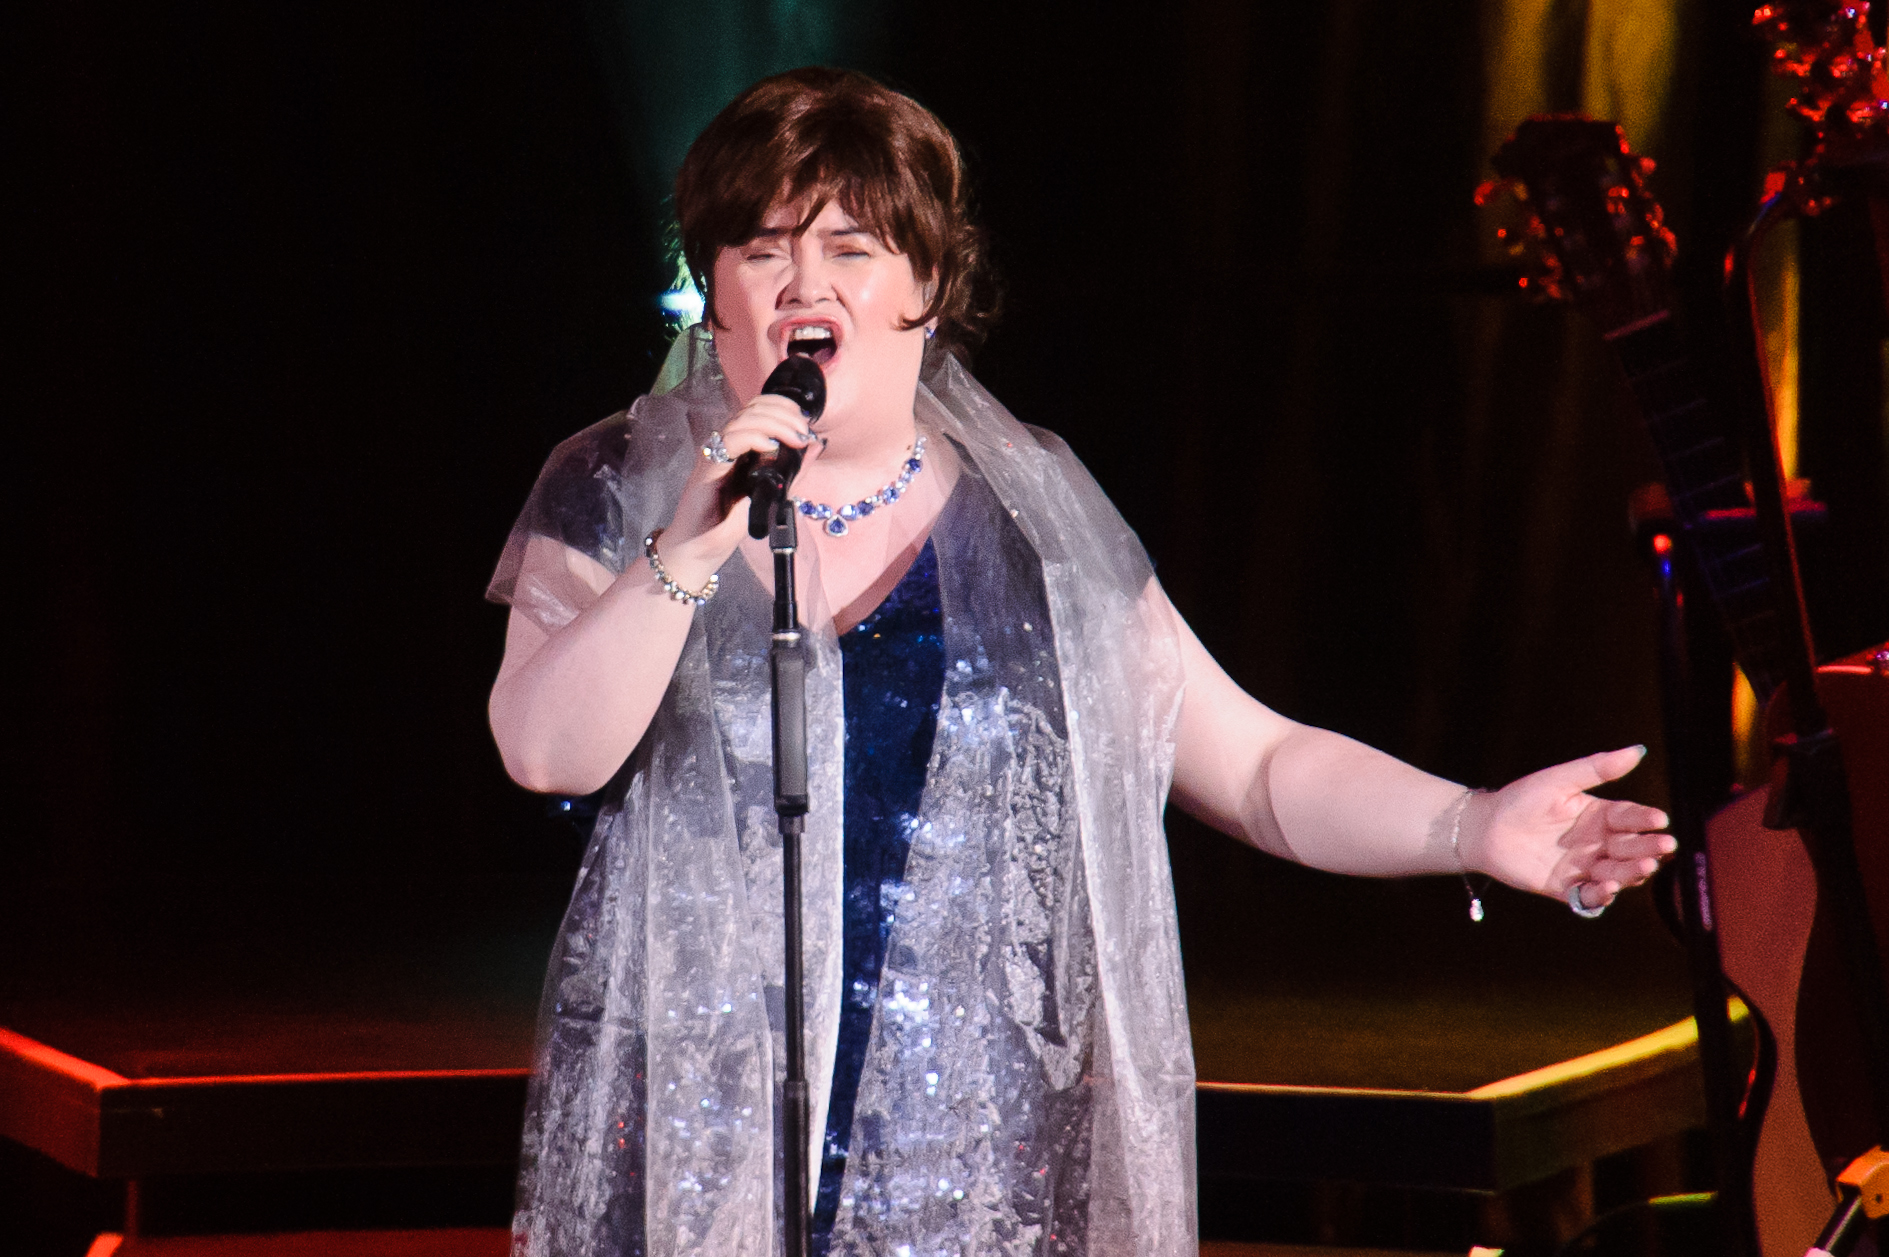 Susan Boyle performs on April 6, 2014 in London, England | Source: Getty Images